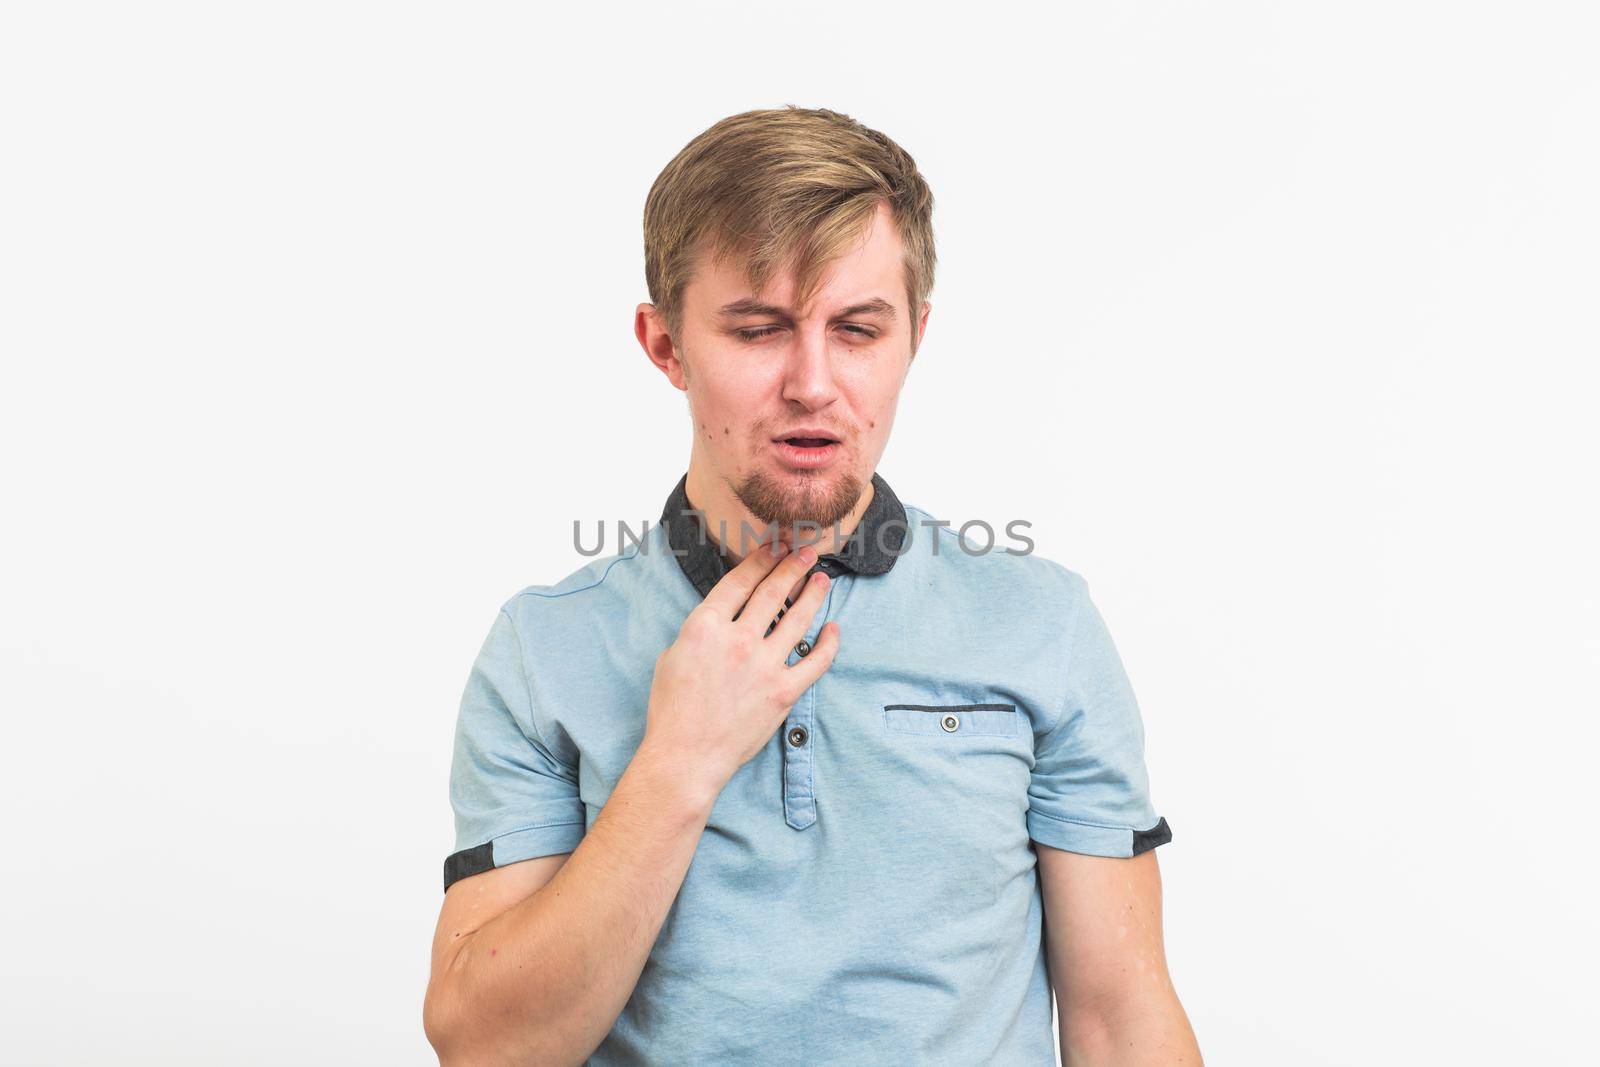 Sore throat. Men touching the neck on white background by Satura86